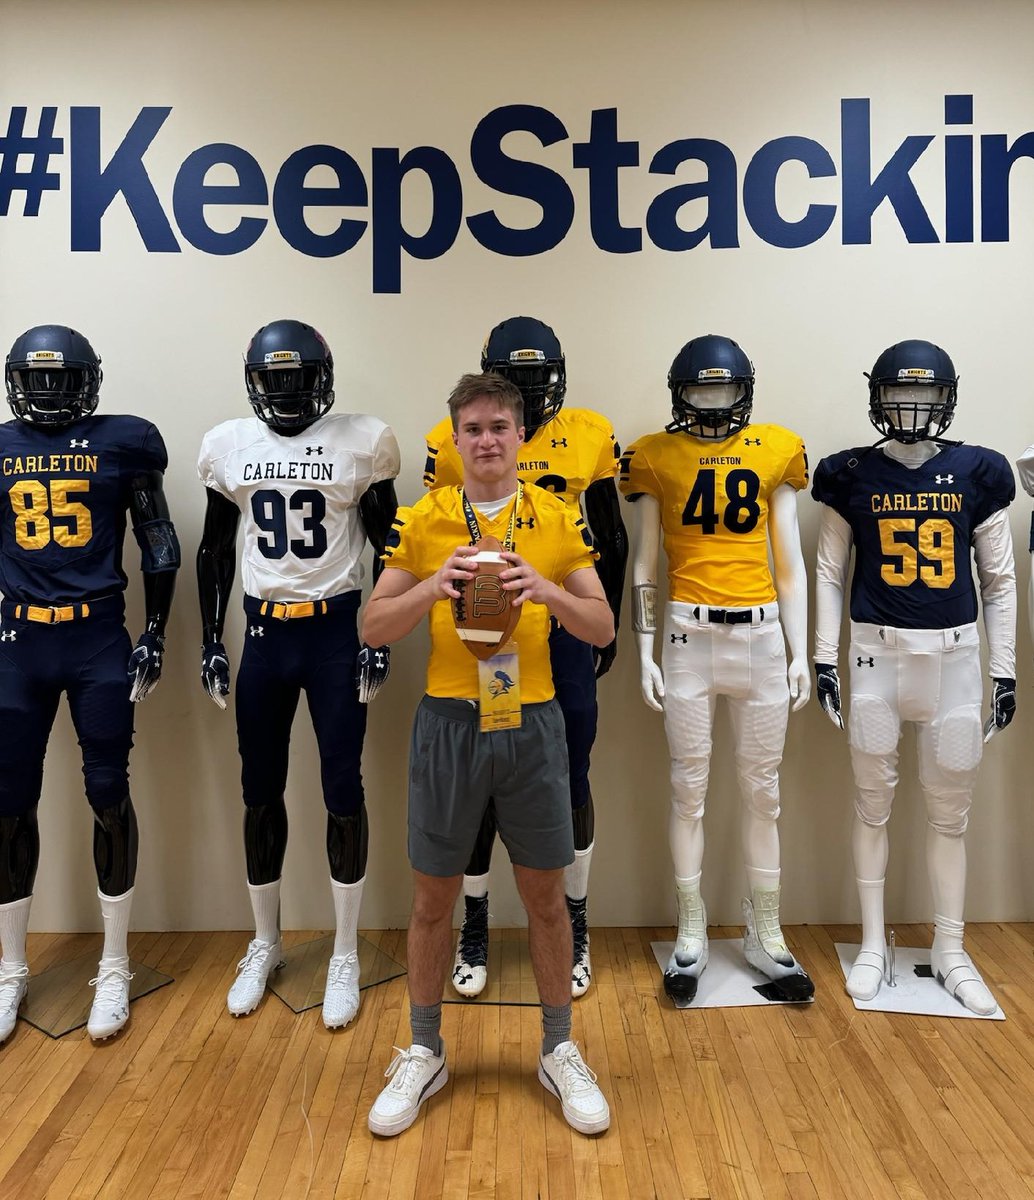 Thank you to @CoachJournell @AB_balogh  @CoachLeeXiong for a fun and informative day and for the opportunity to visit campus and learn more about the college and the @CarletonFB program. Looking forward to our paths crossing again soon! #KeepStacking